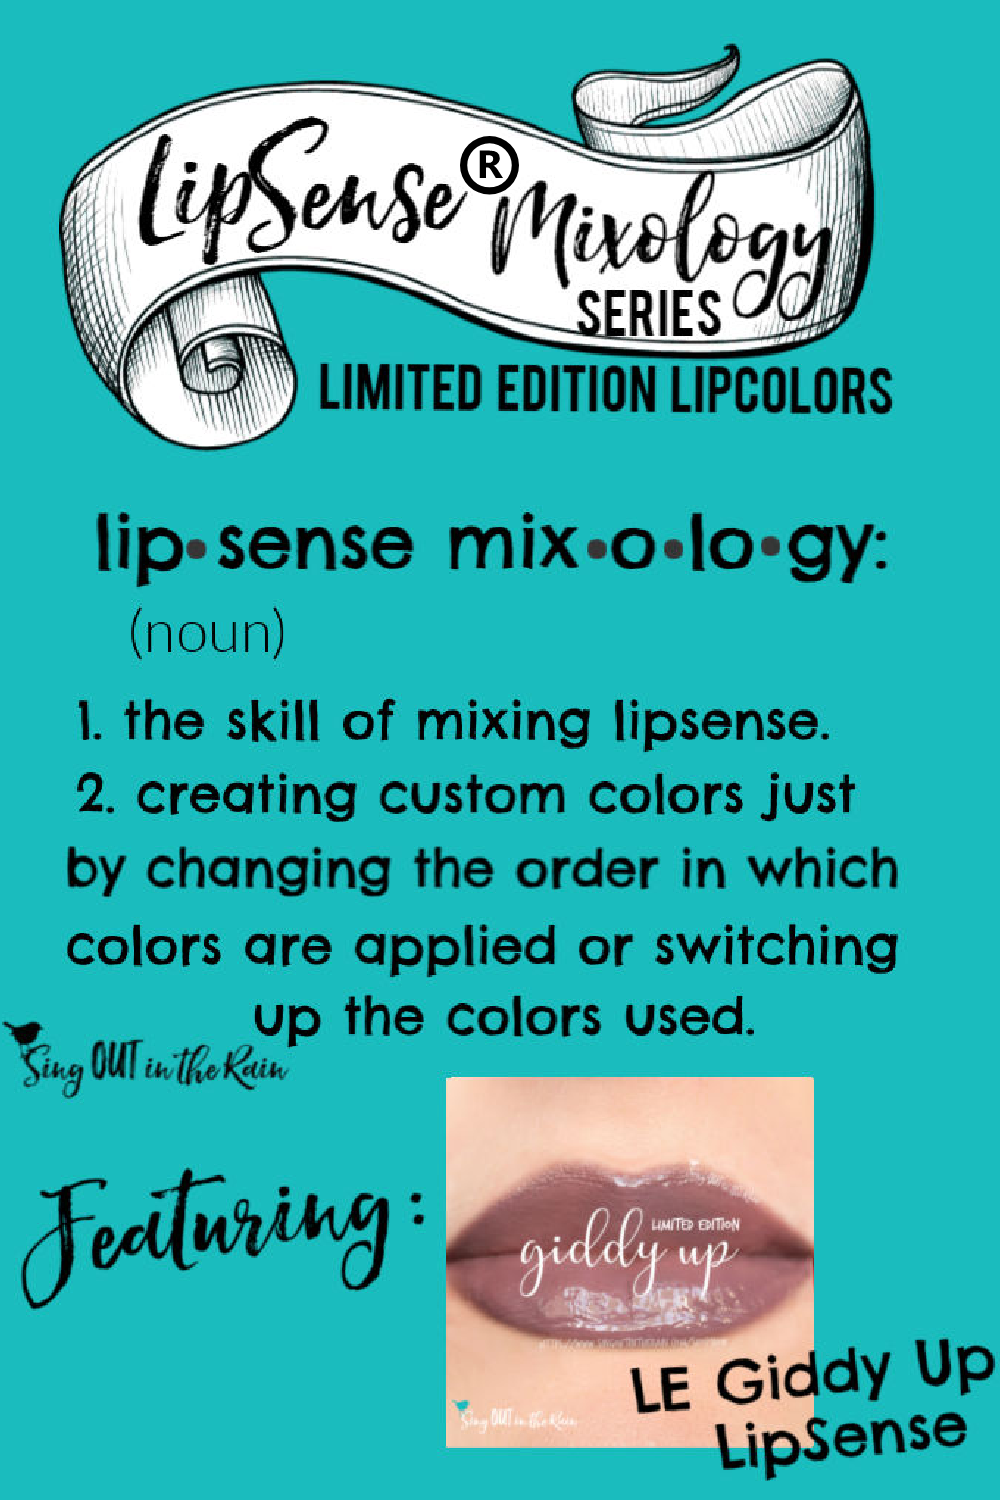 The Ultimate Guide to Giddy Up LipSense Mixology